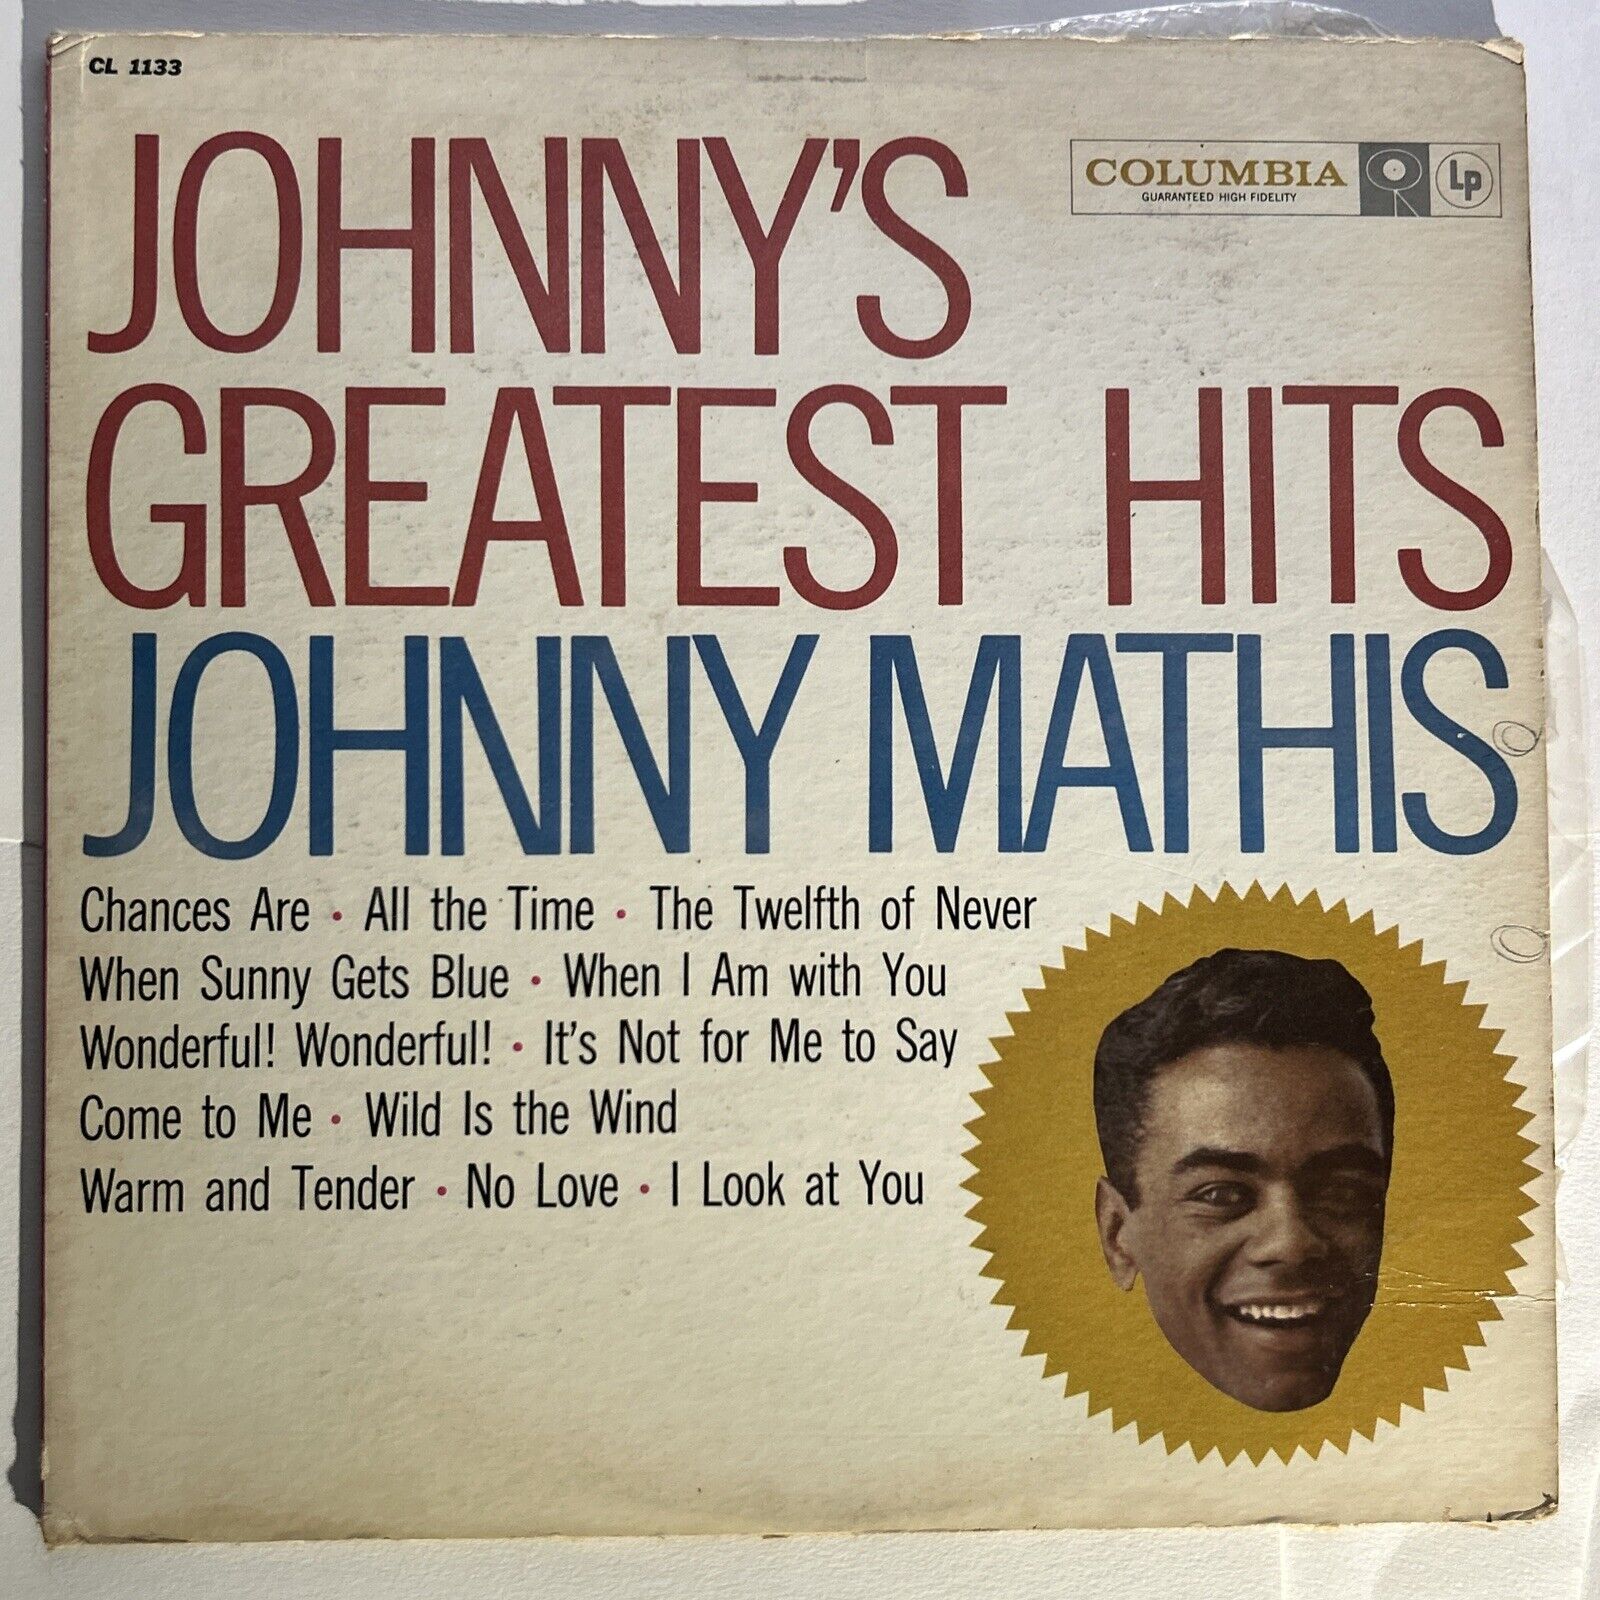 Johnny Mathis: Johnny's Greatest Hits 1958 Columbia Records MONO Lp CL 1133